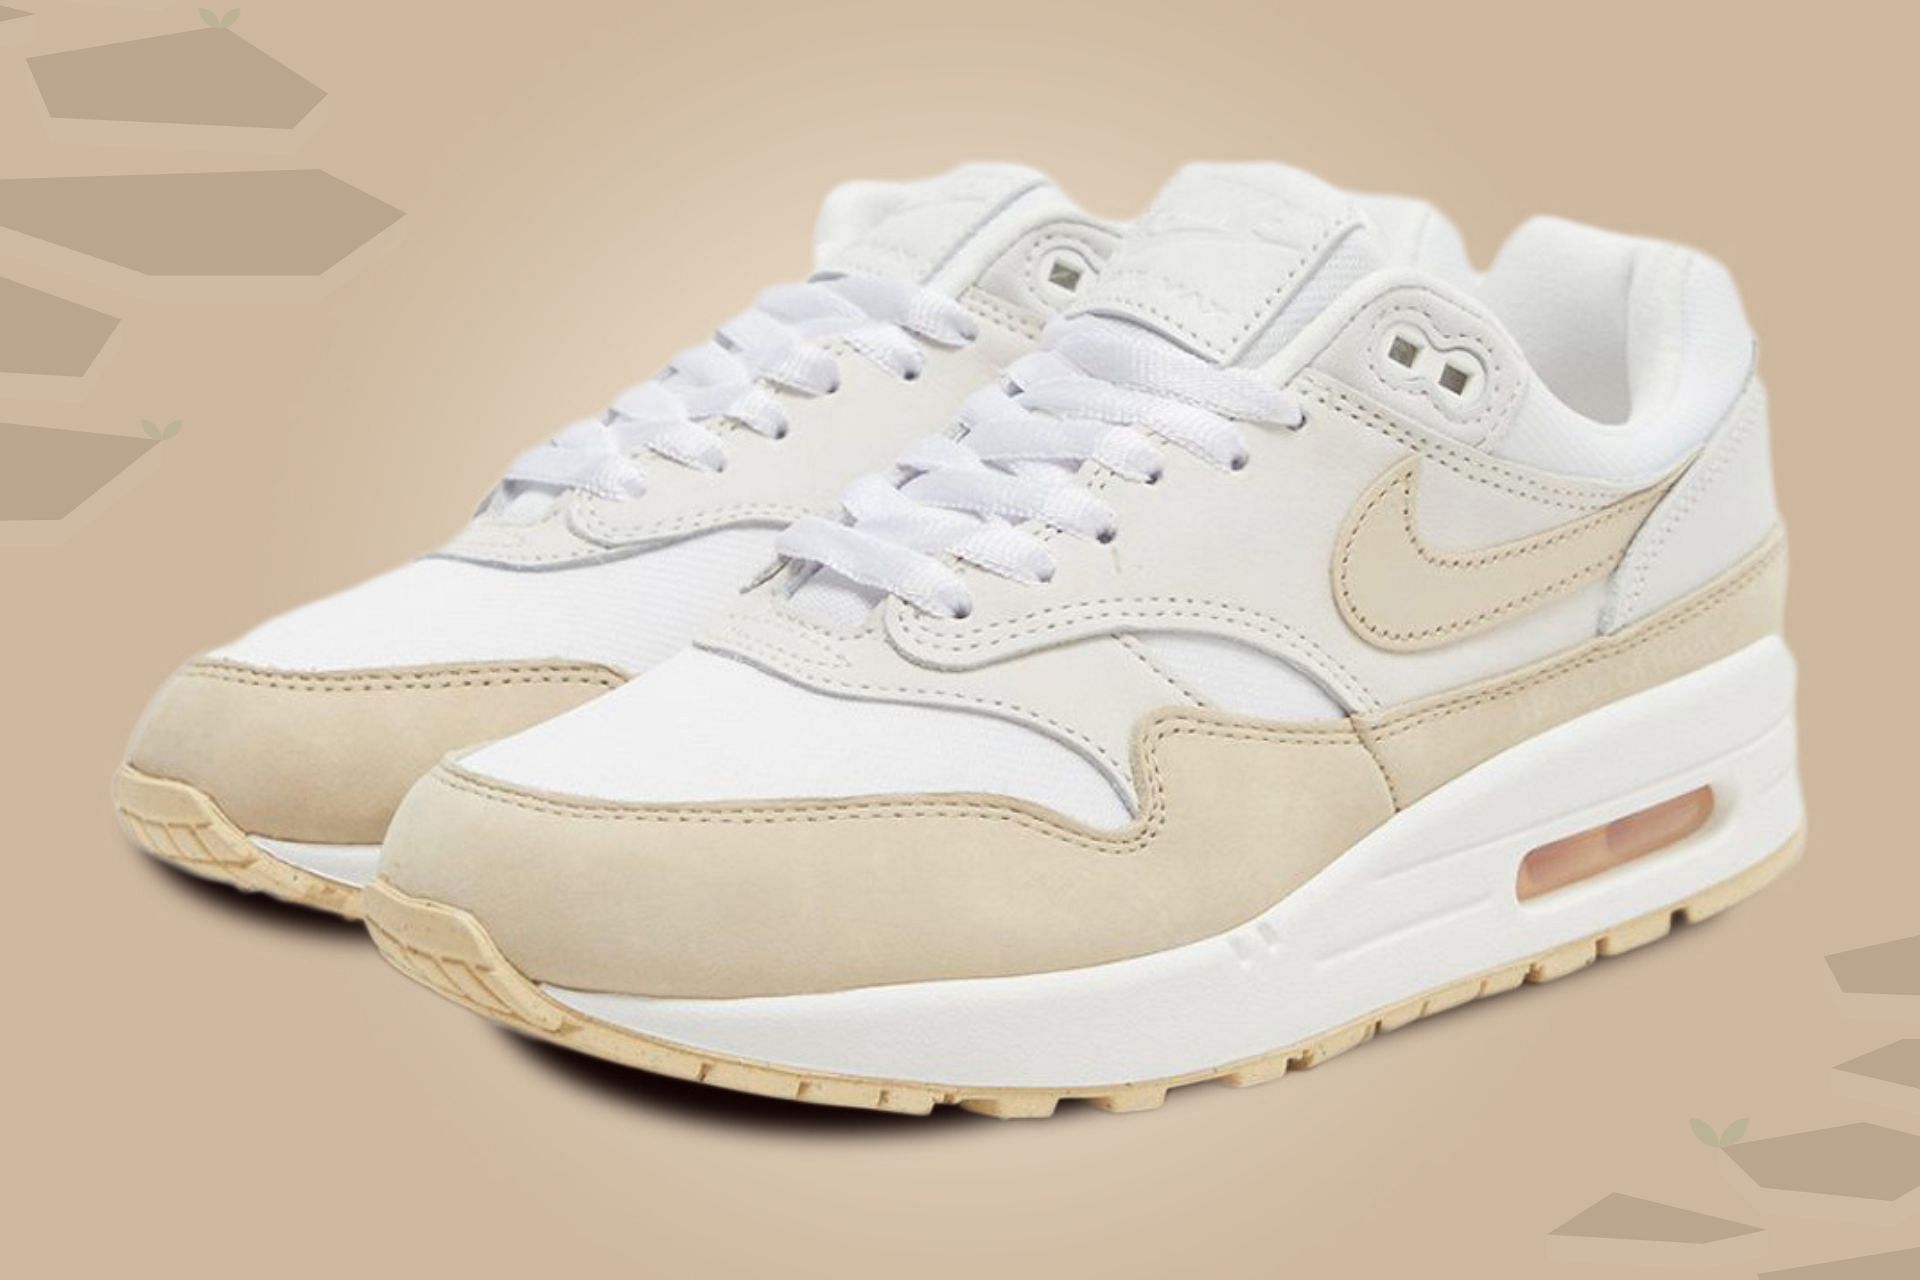 Max Beige: Nike Air Max Premium "Summit White Sanddrift" sneakers: Where to buy, and more explored